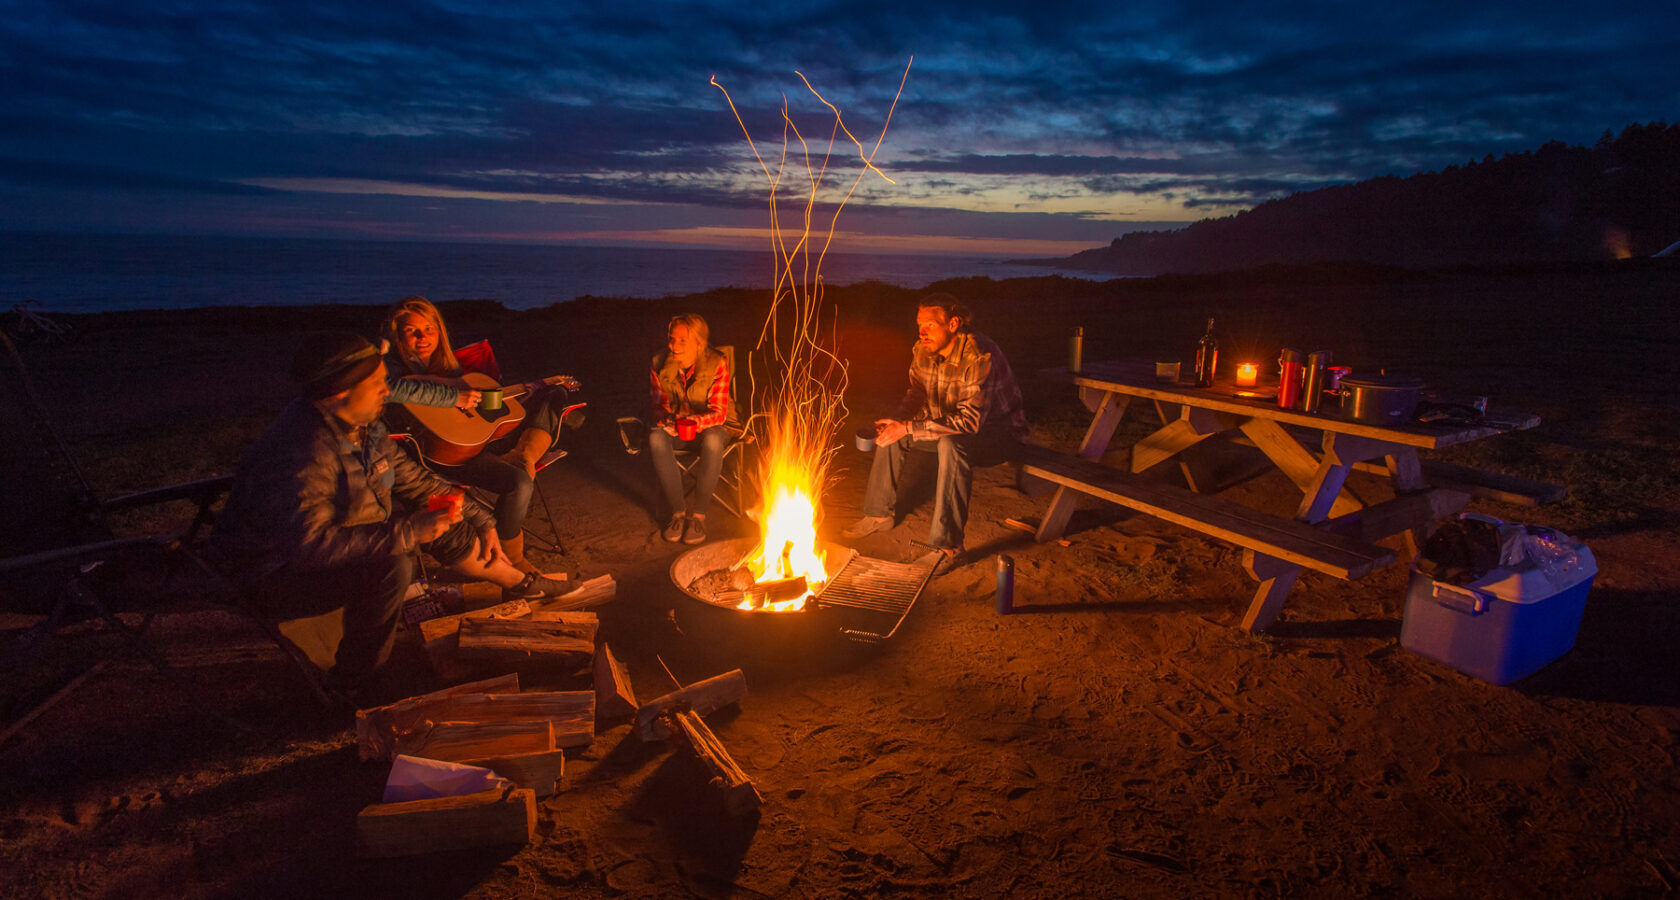 Friends gathering around a campfire at night